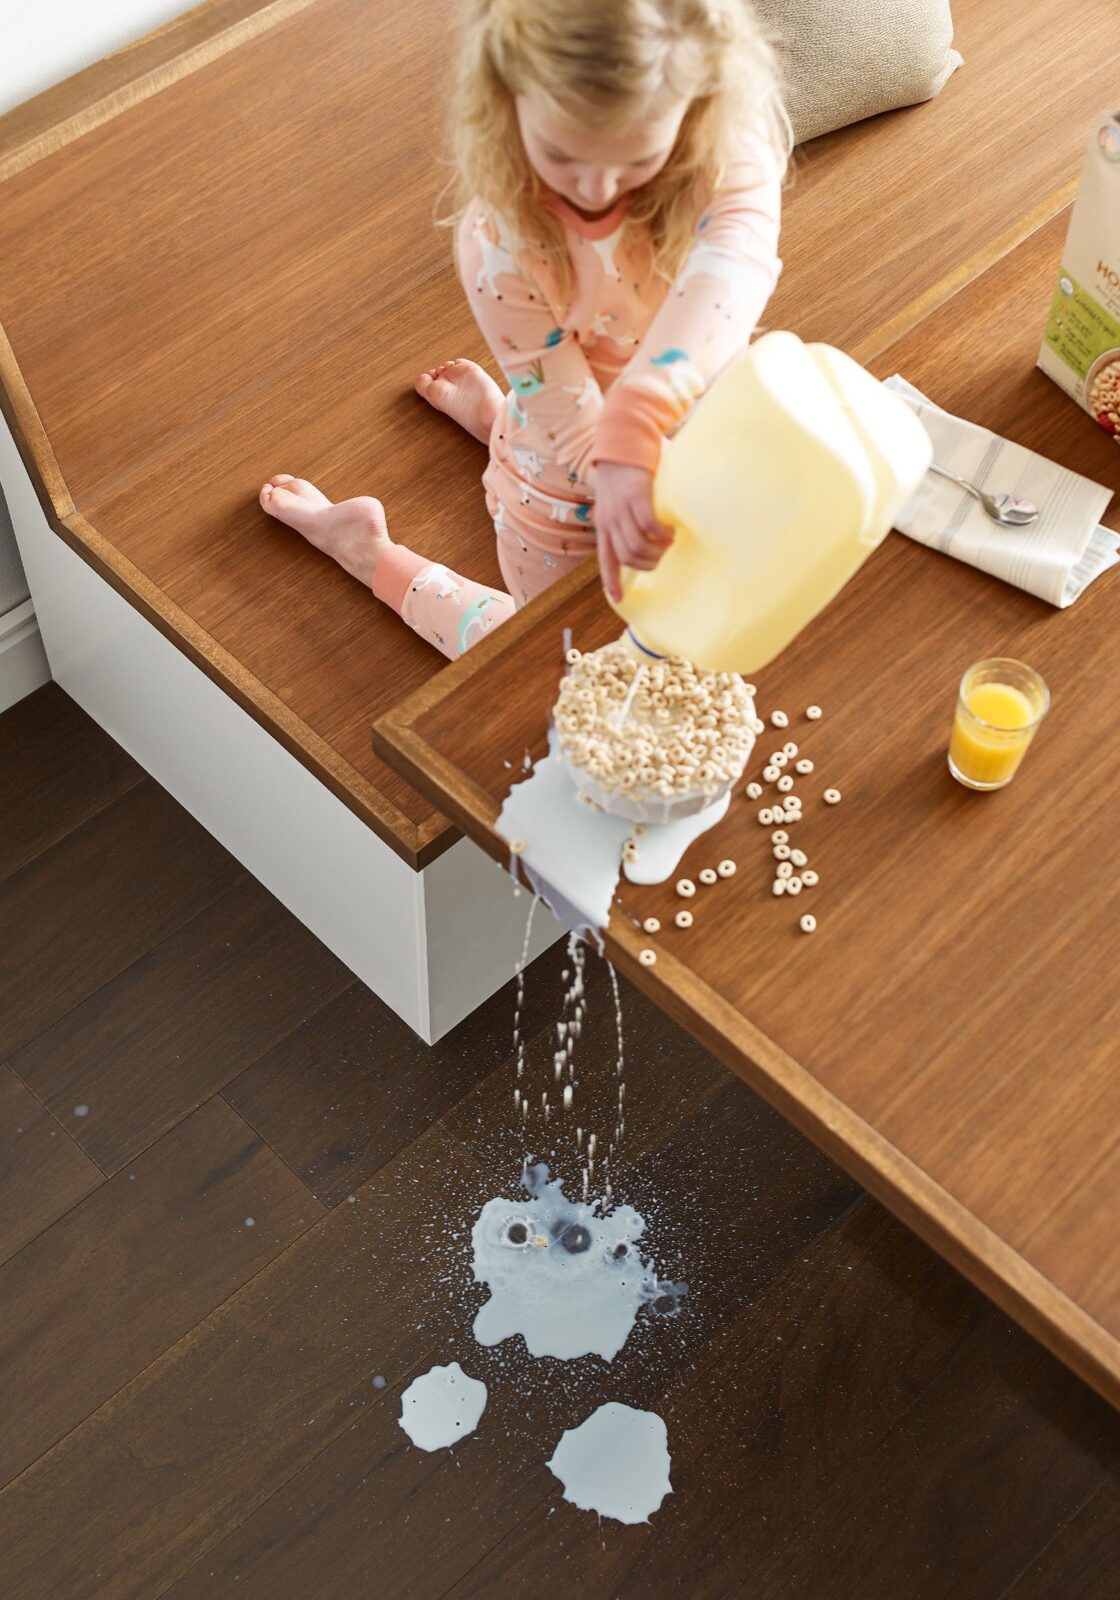 Milk spill cleaning | Floor to Ceiling Freeport